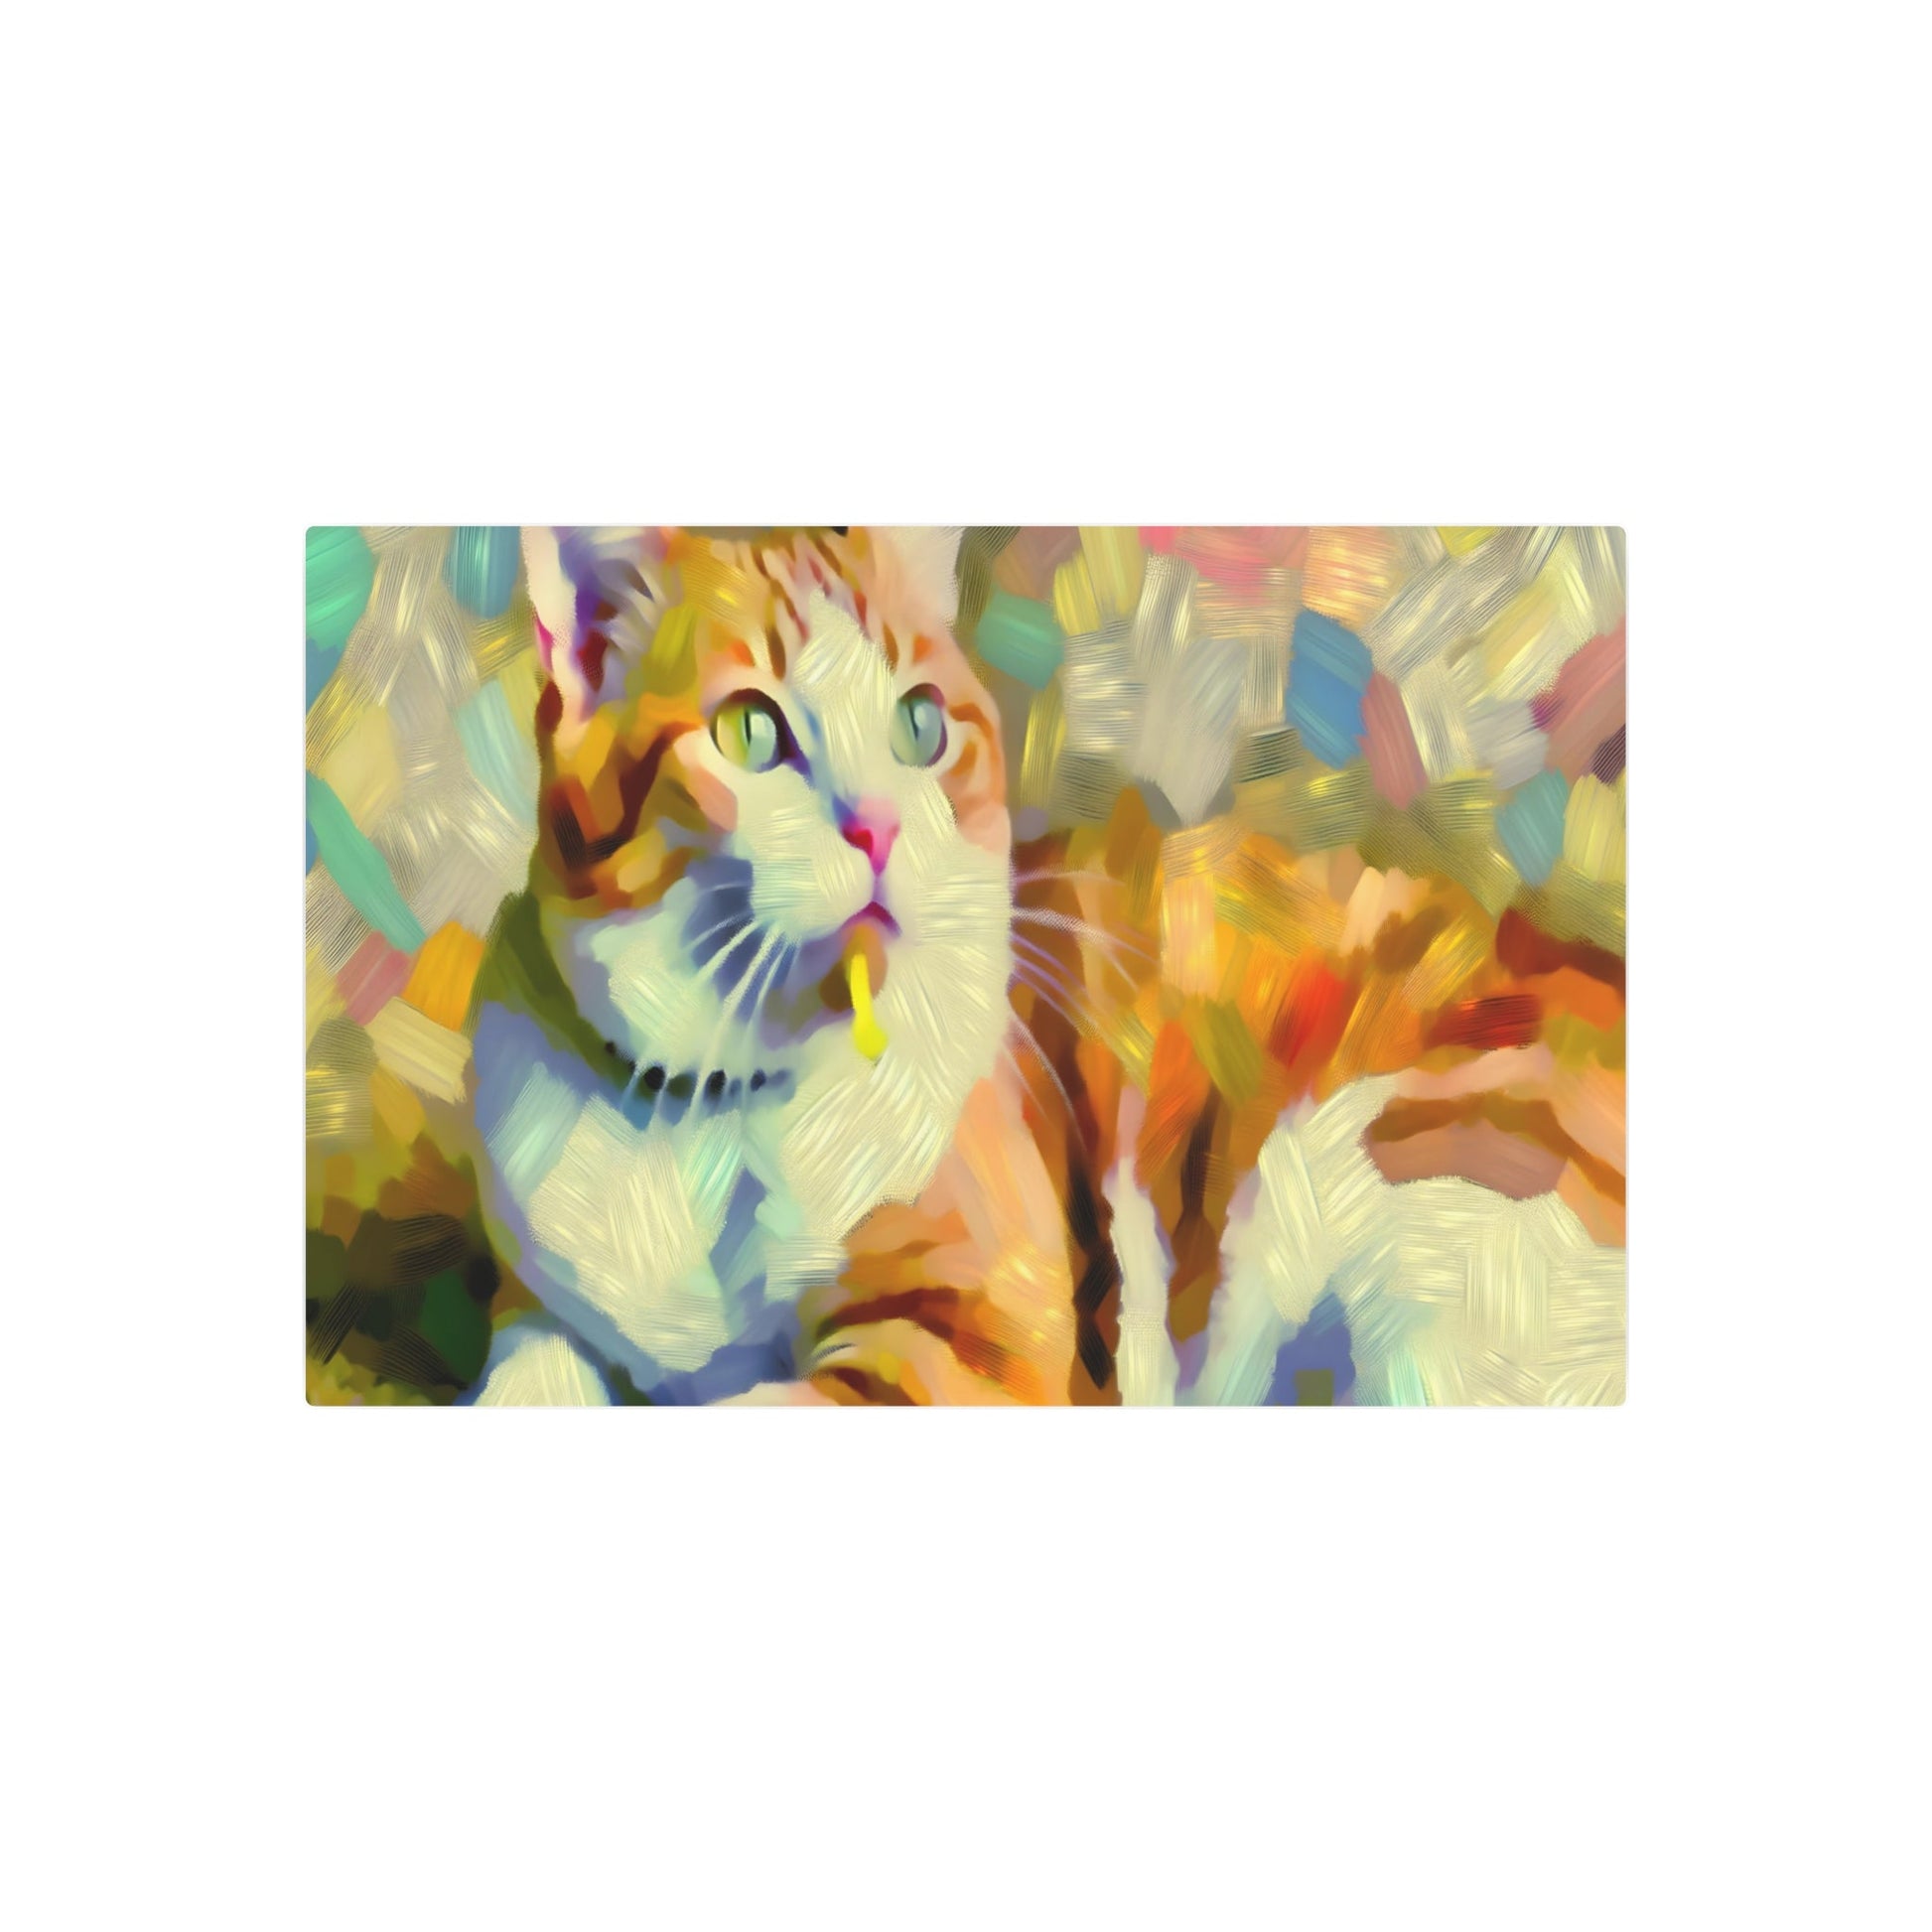 Metal Poster Art | "Impressionist Style Cat Artwork - Western Art Styles, Impressionism Collection" - Metal Poster Art 36″ x 24″ (Horizontal) 0.12''